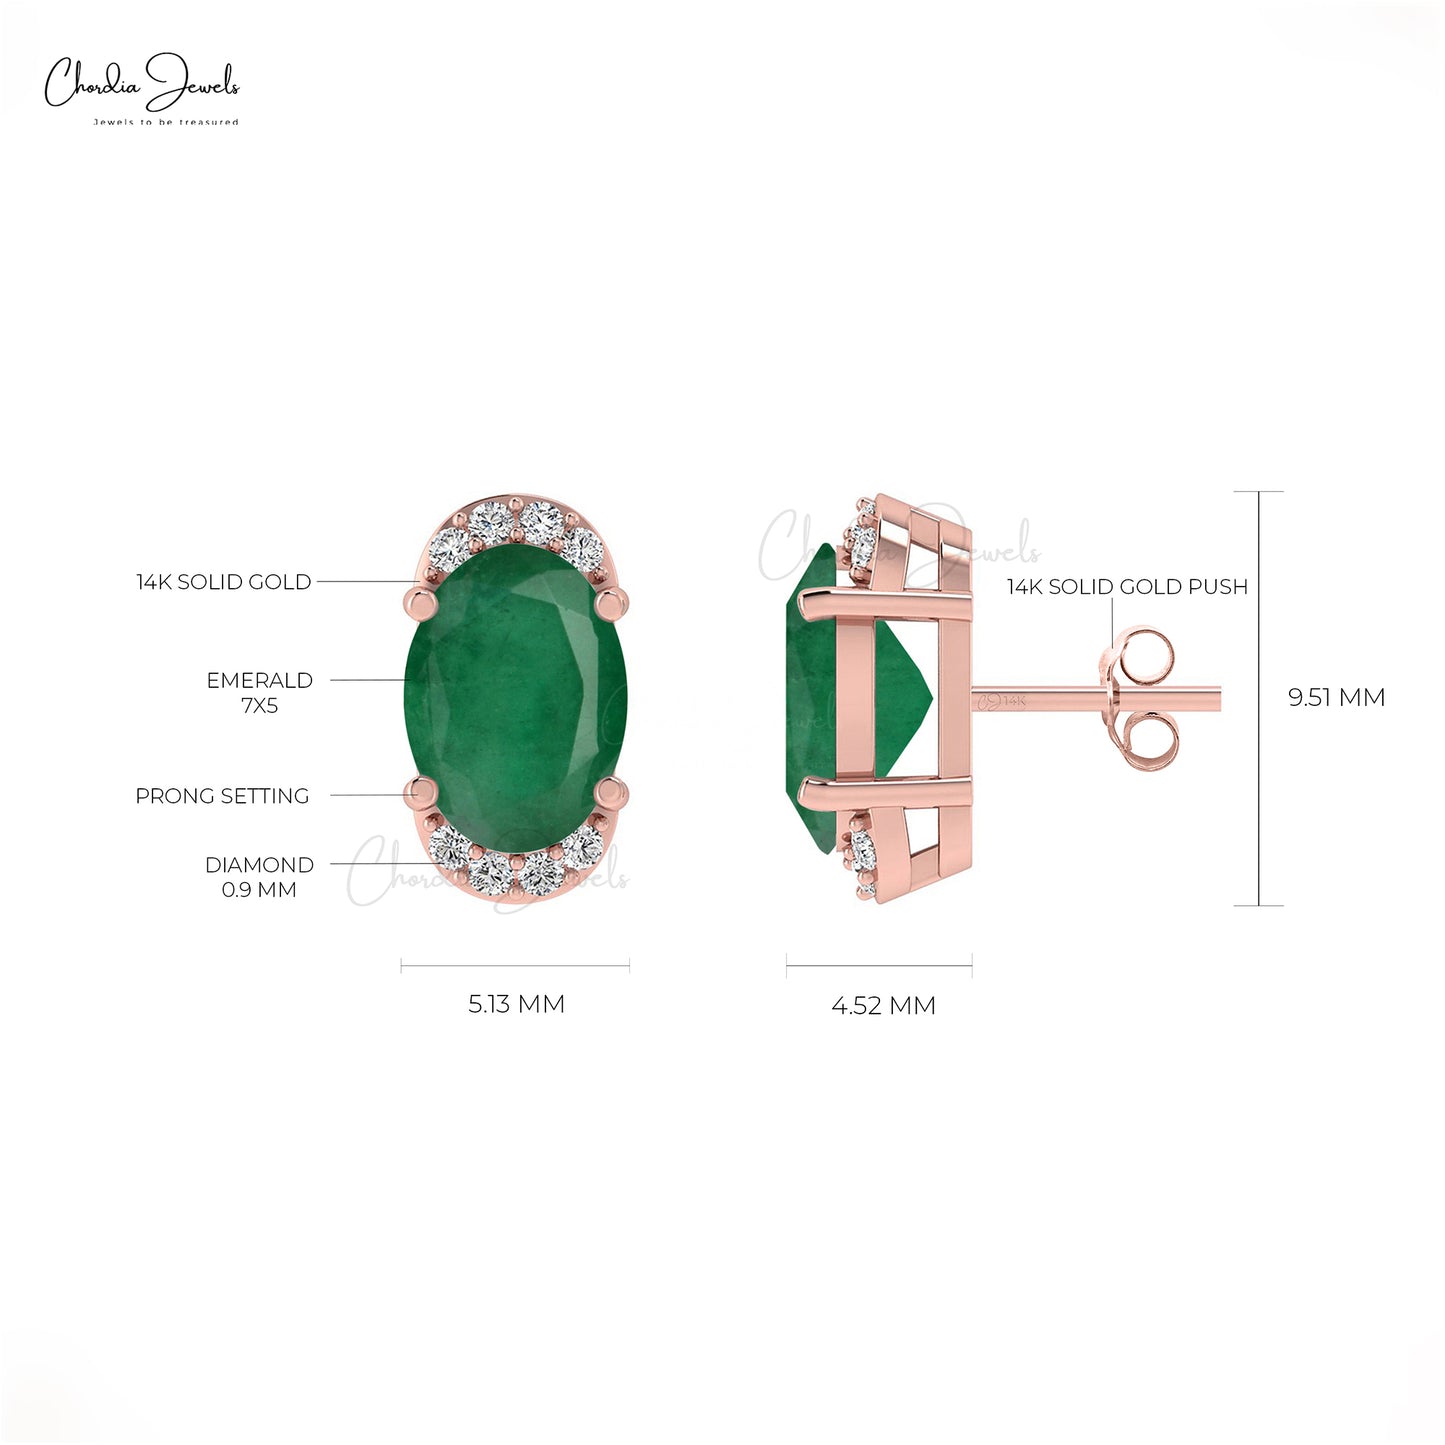 Step into the spotlight with these real emerald earrings.